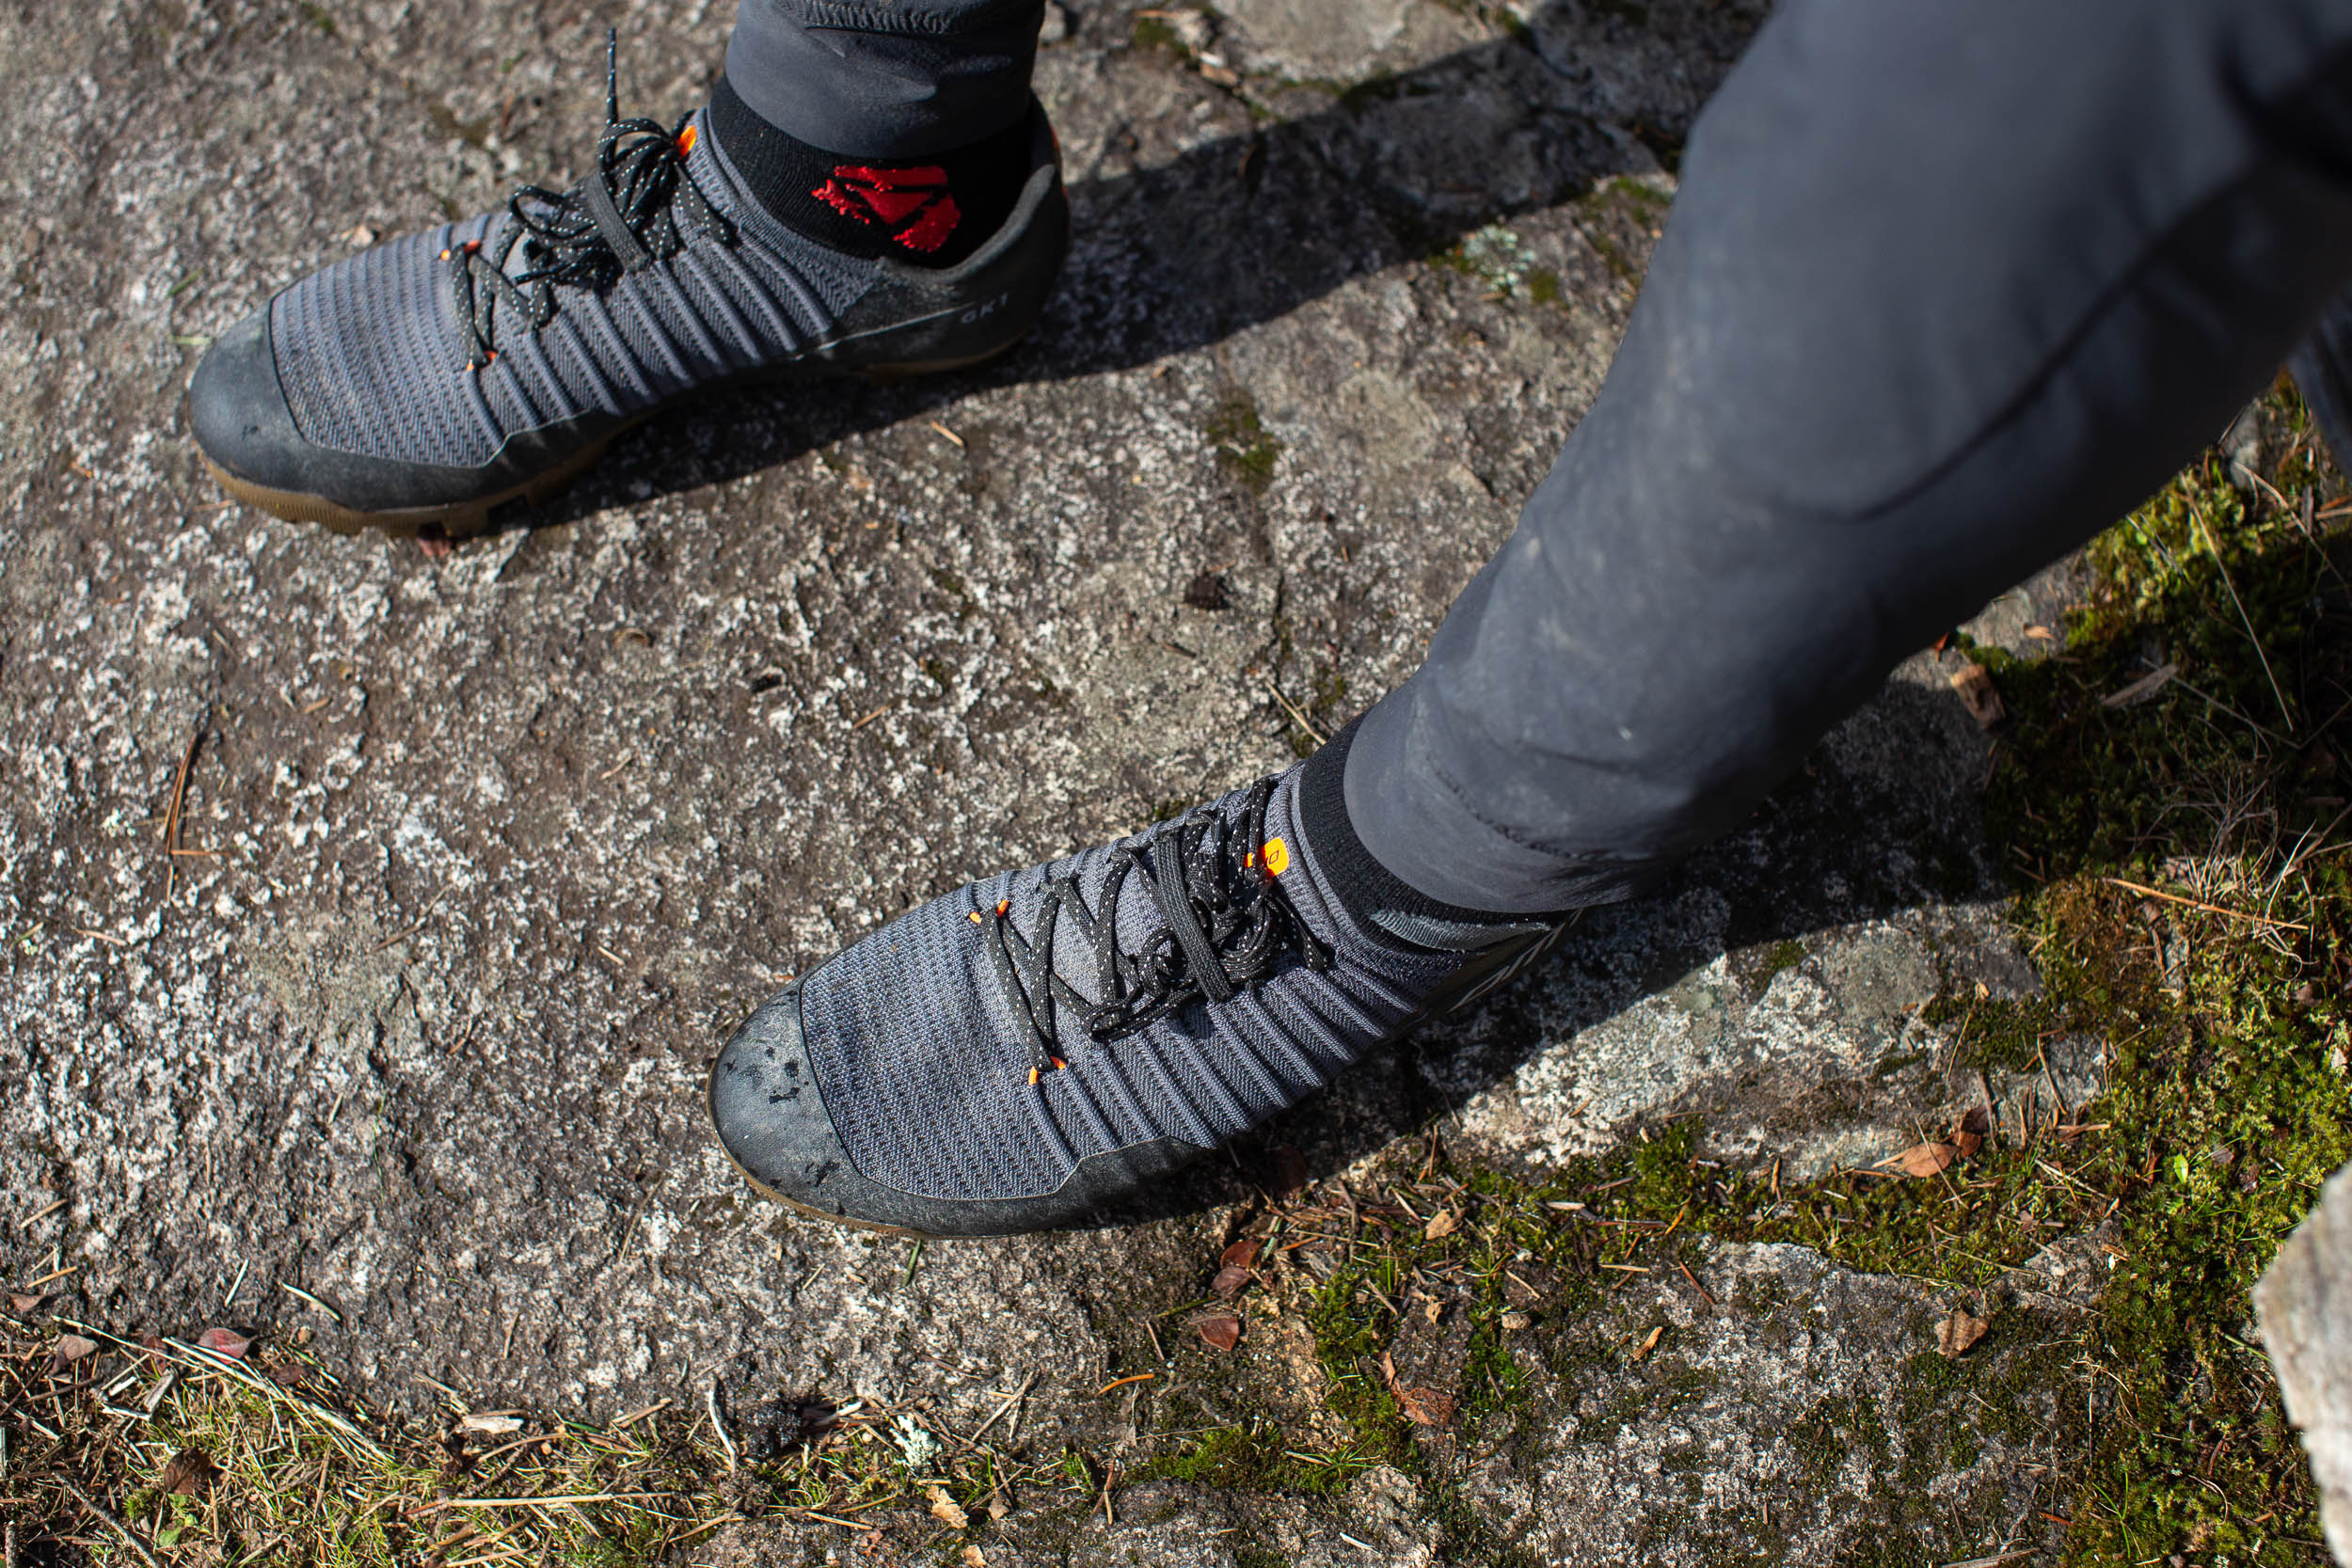 DMT GK1 Gravel Shoes: First Impressions - Swiss Cycles